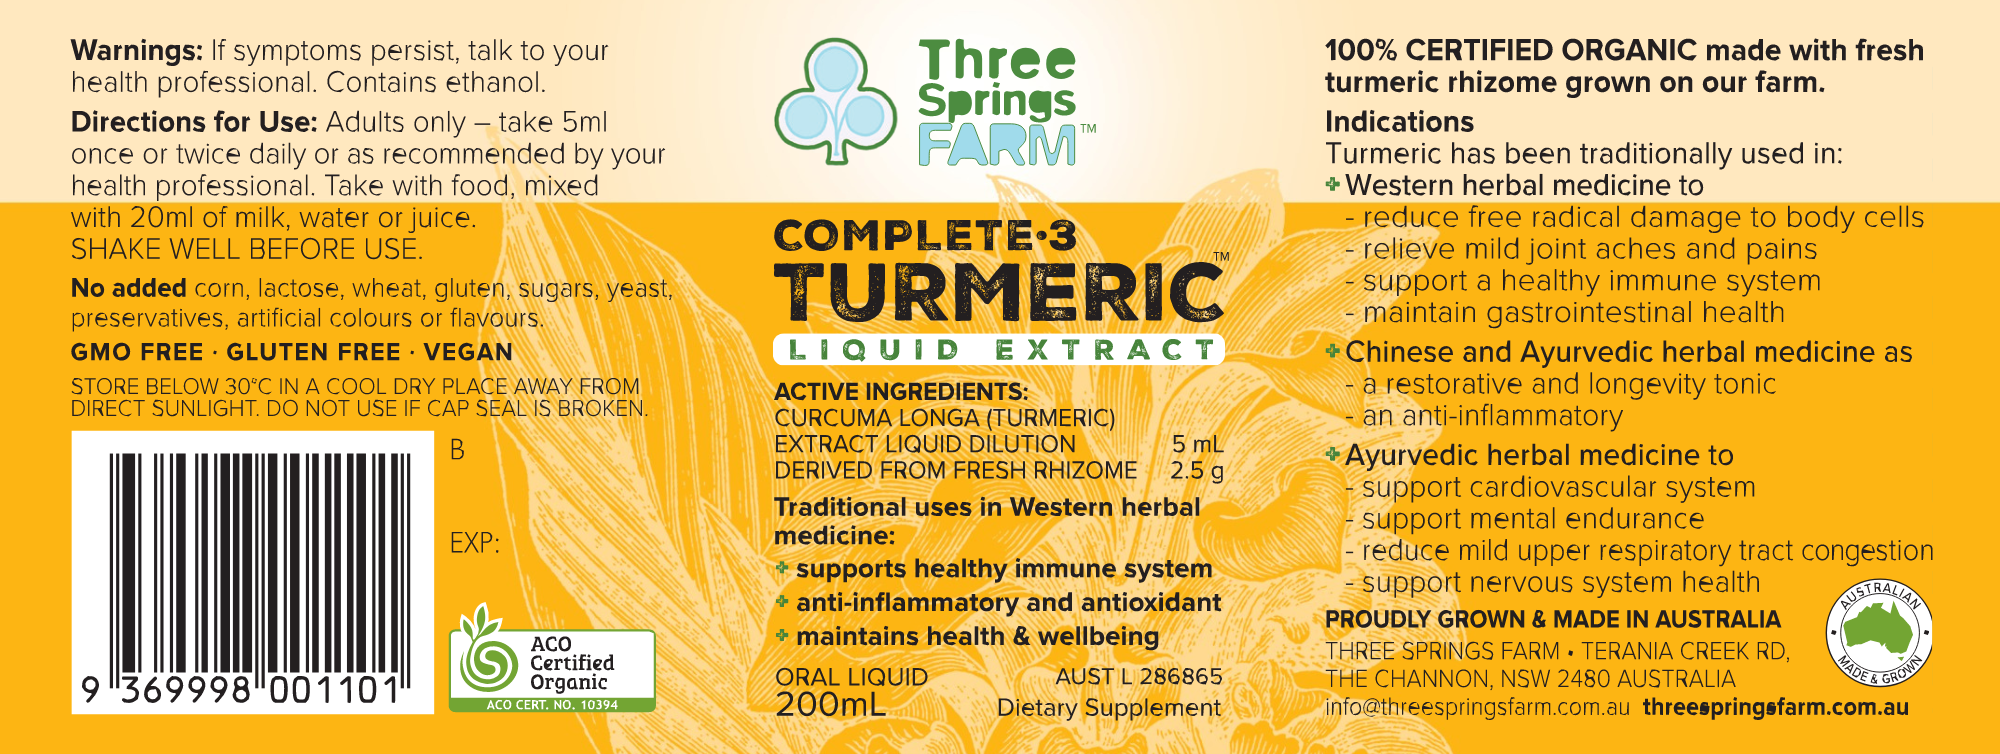 Label of the Three Springs Farm bottle of Complete 3 Turmeric 